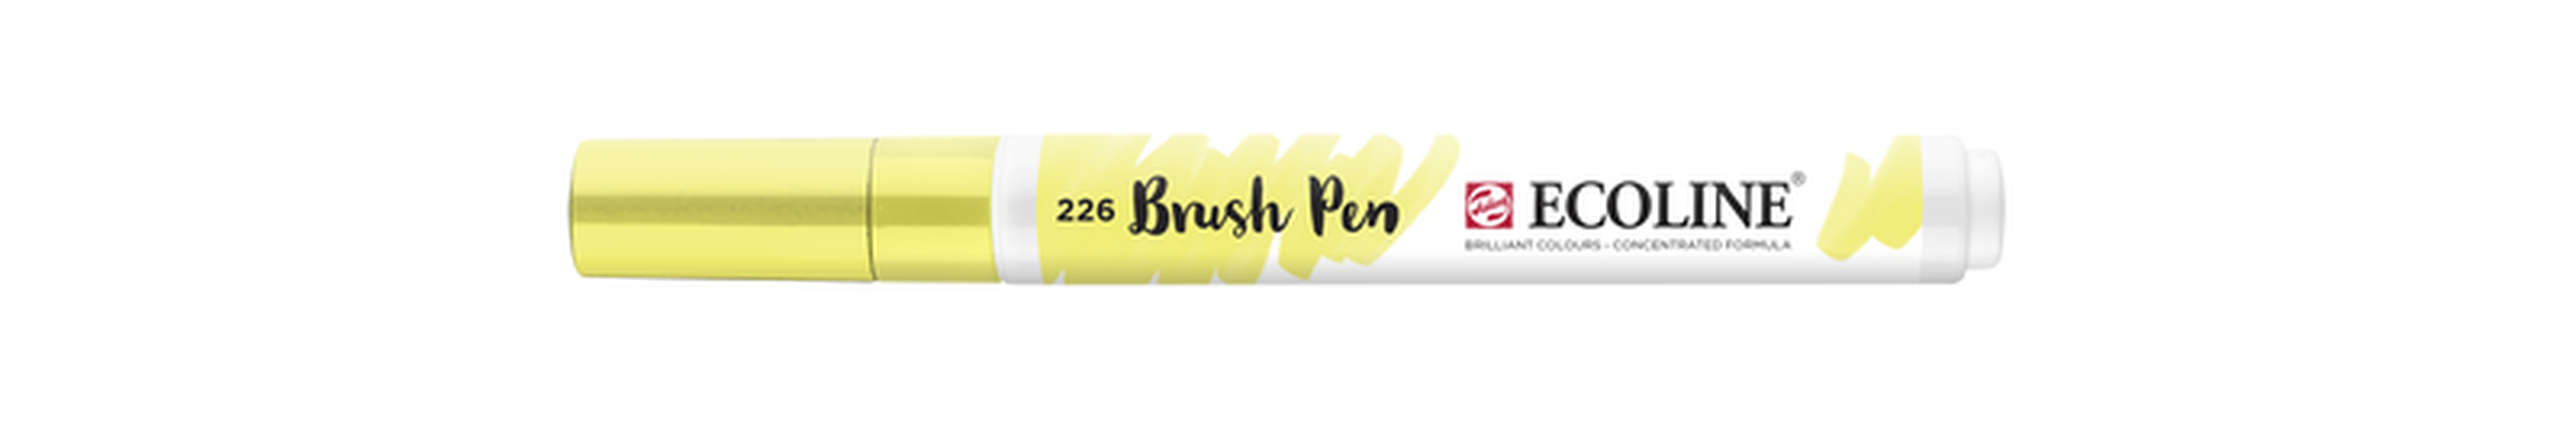 Talens Brush Pen Ecoline Number 226 Color Pastel Yellow